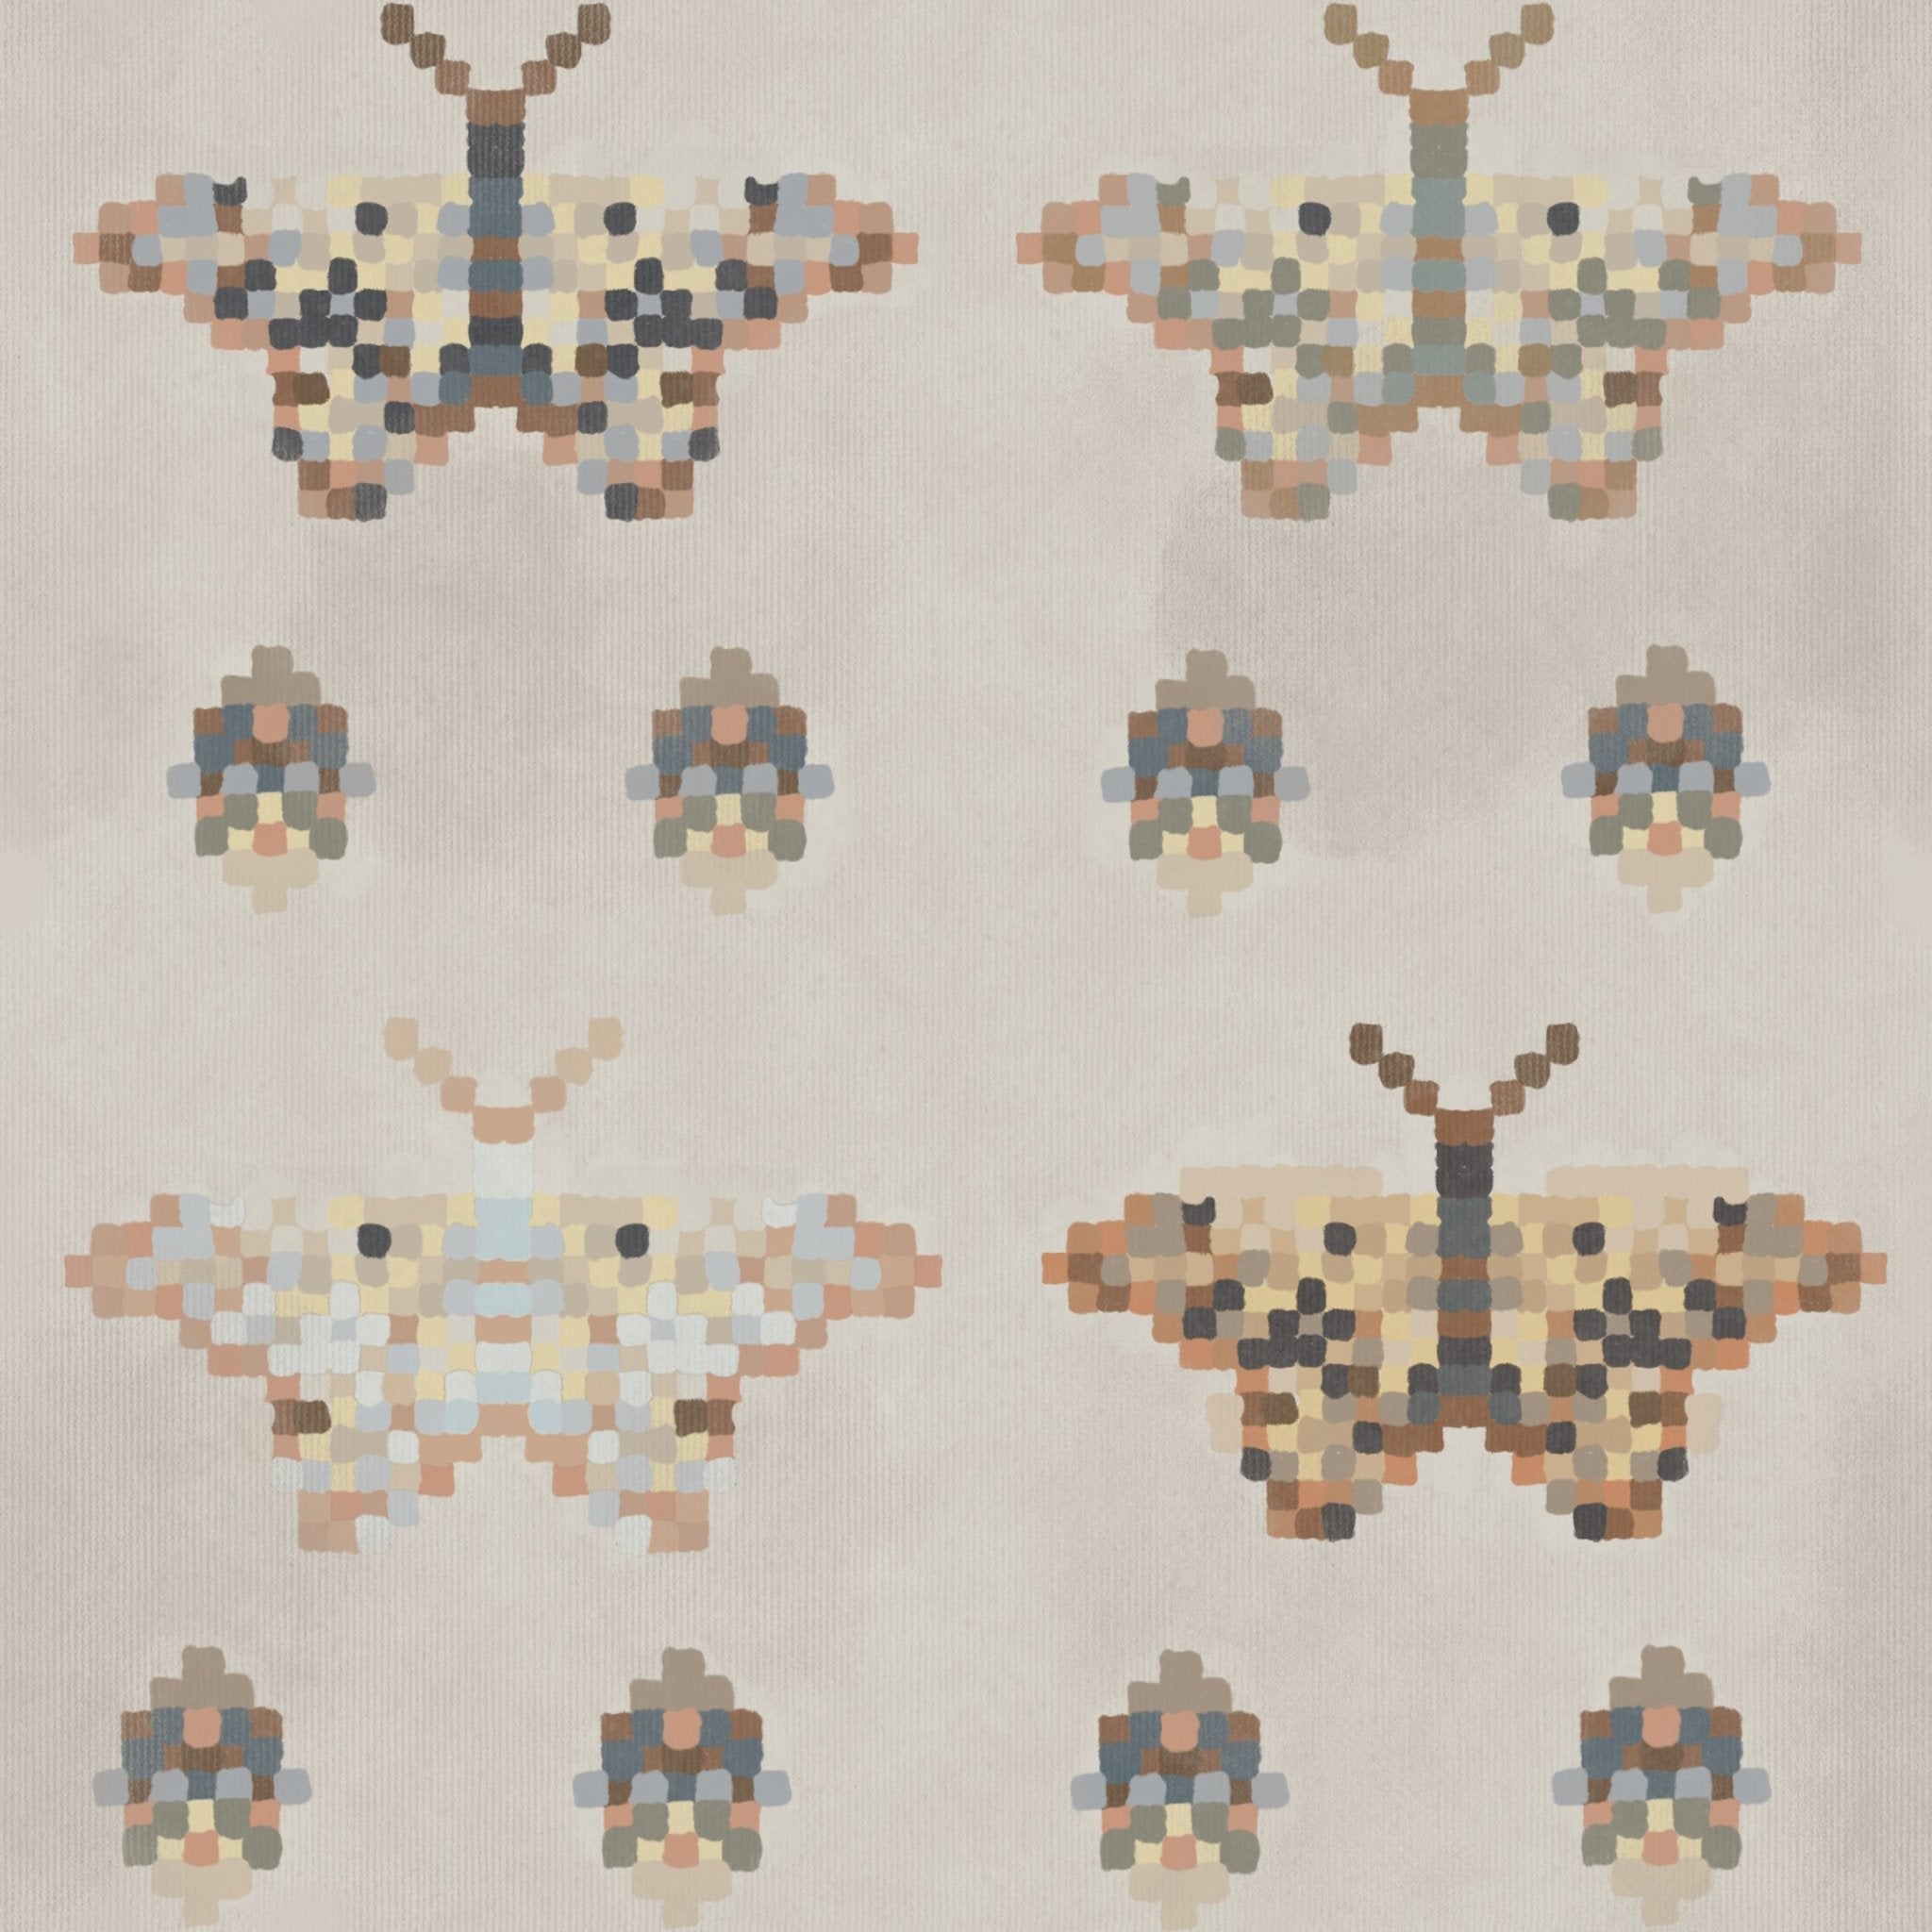 Close-up of a mosaic butterfly wallpaper pattern. The design features butterflies and smaller motifs made of pixel-like squares in pastel and earthy tones on a light background, creating a whimsical and artistic effect.